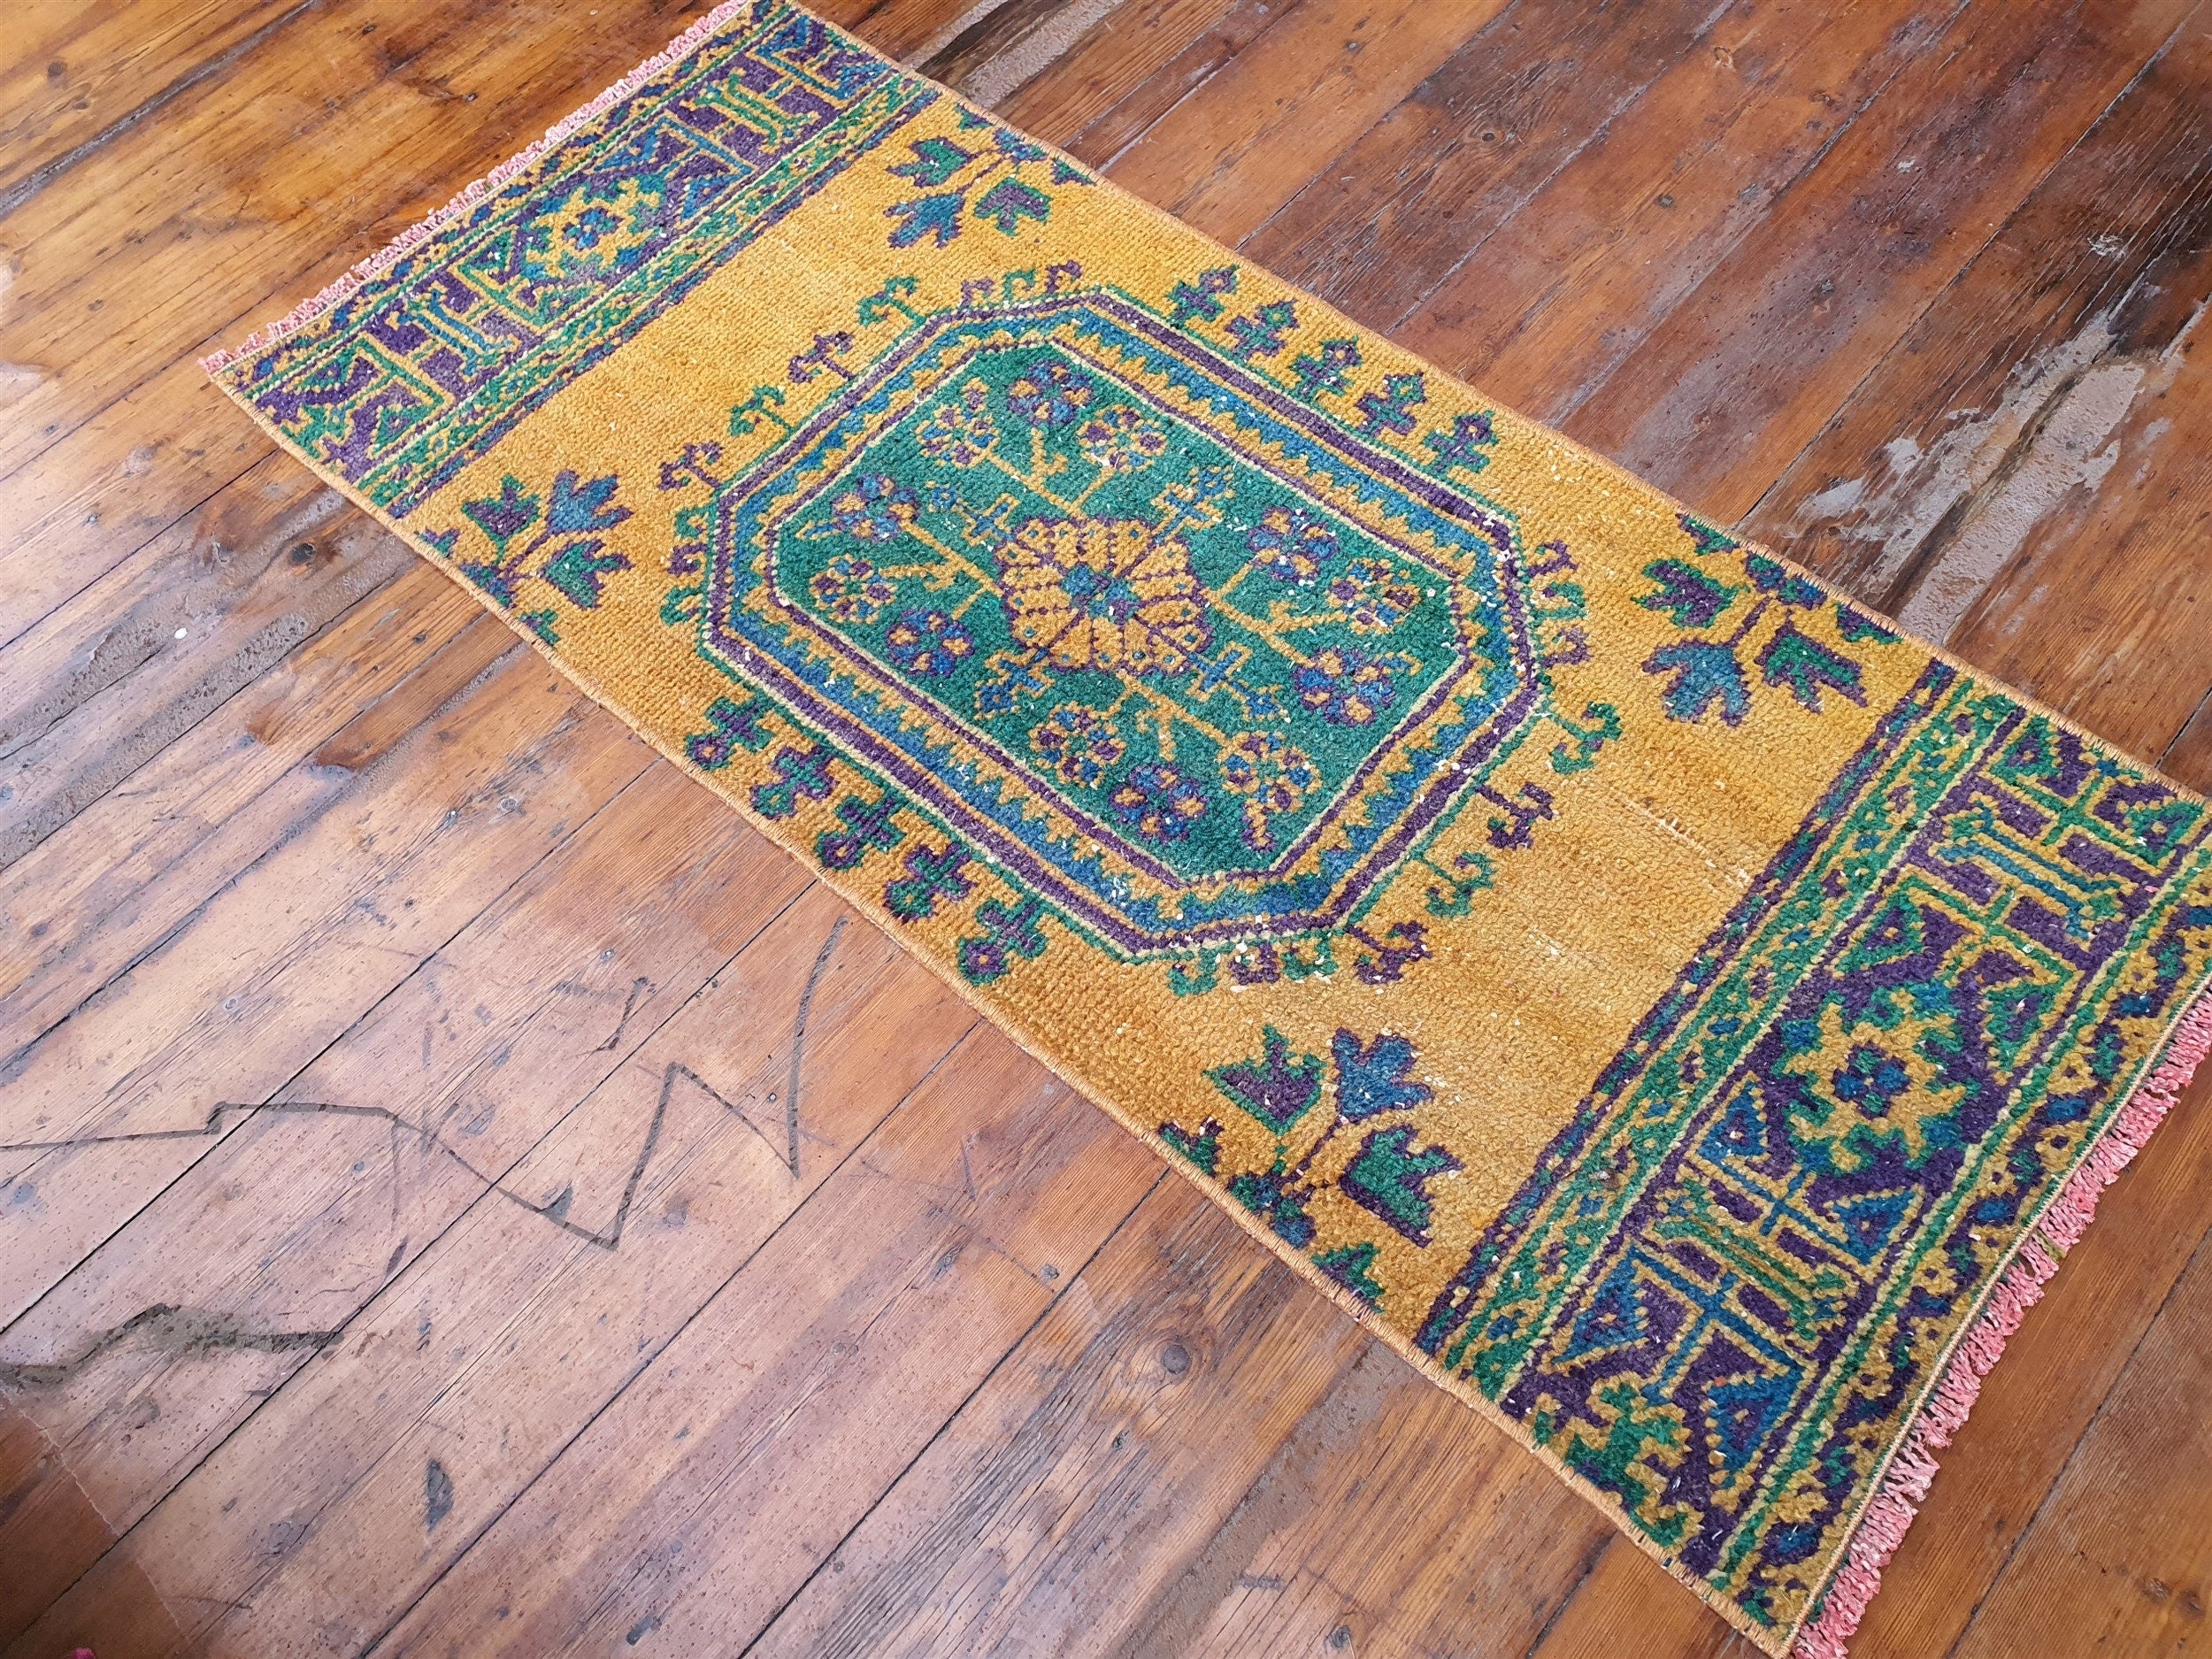 Small Turkish Rug, 4 ft 3 in x 1 ft 8 in, Apricot Orange and Teal Green / Grey Vintage Faded Distressed Door Mat